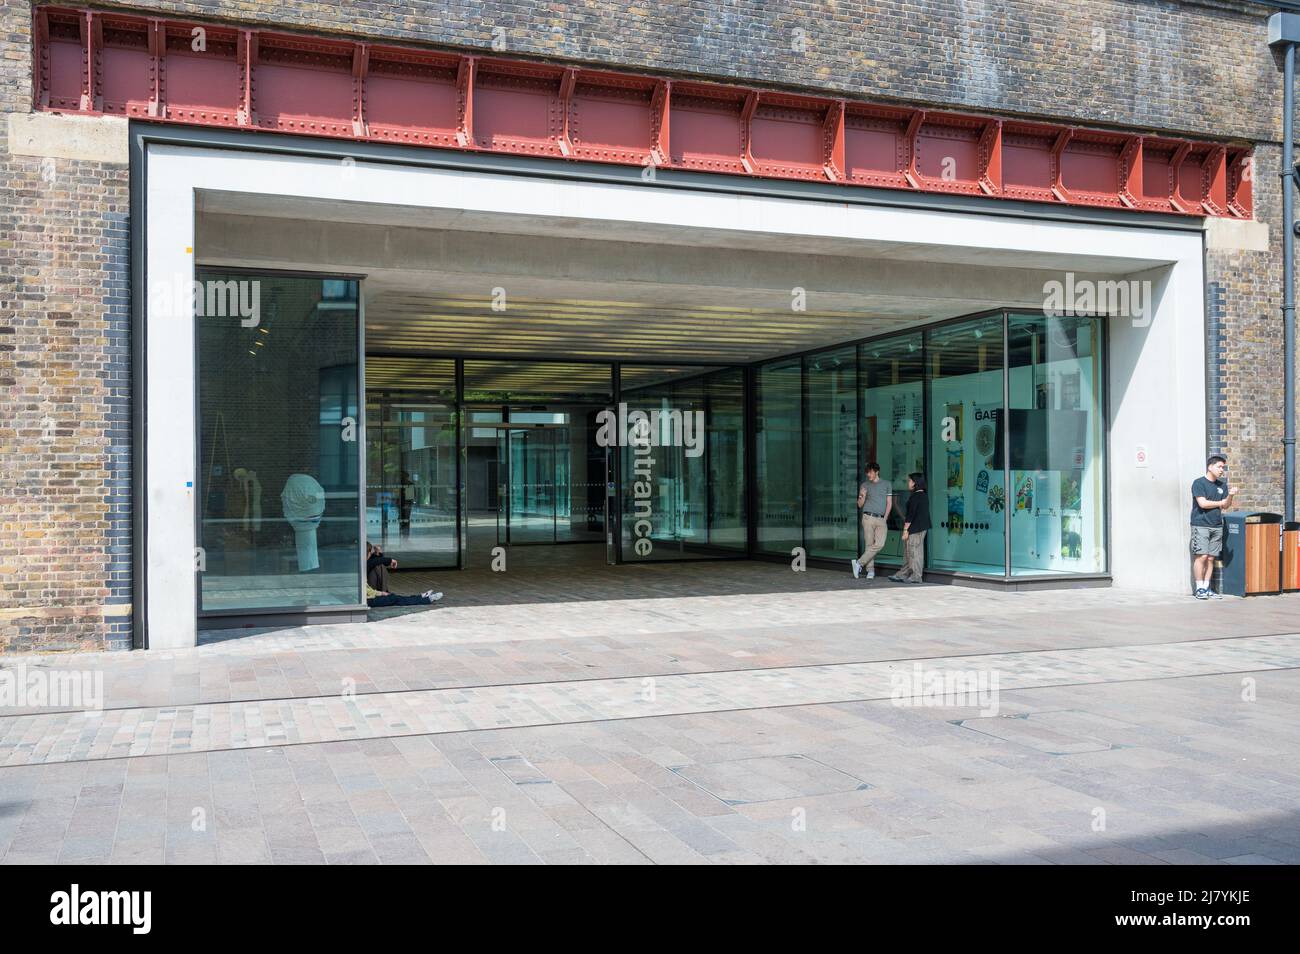 Entrance of Central St Martins art school in Granary Square, London, England, UK. Stock Photo